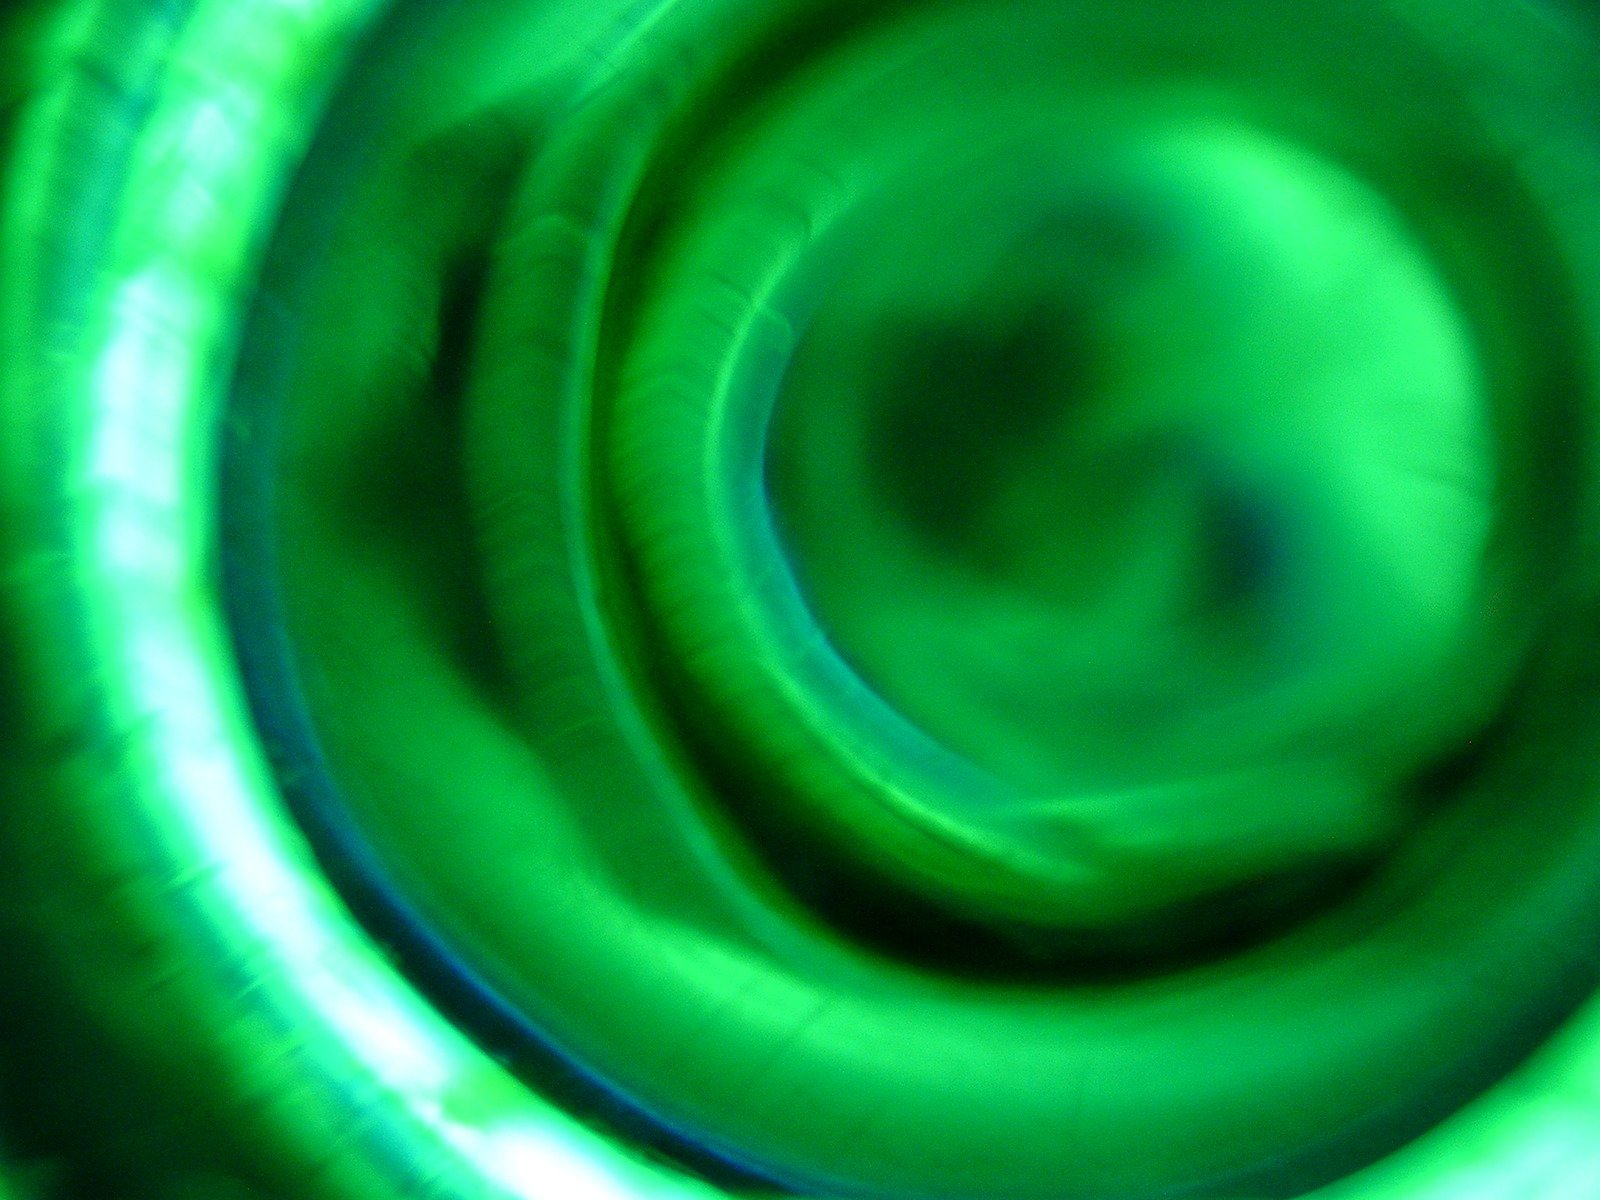 green rings moving quickly together in a blurry po